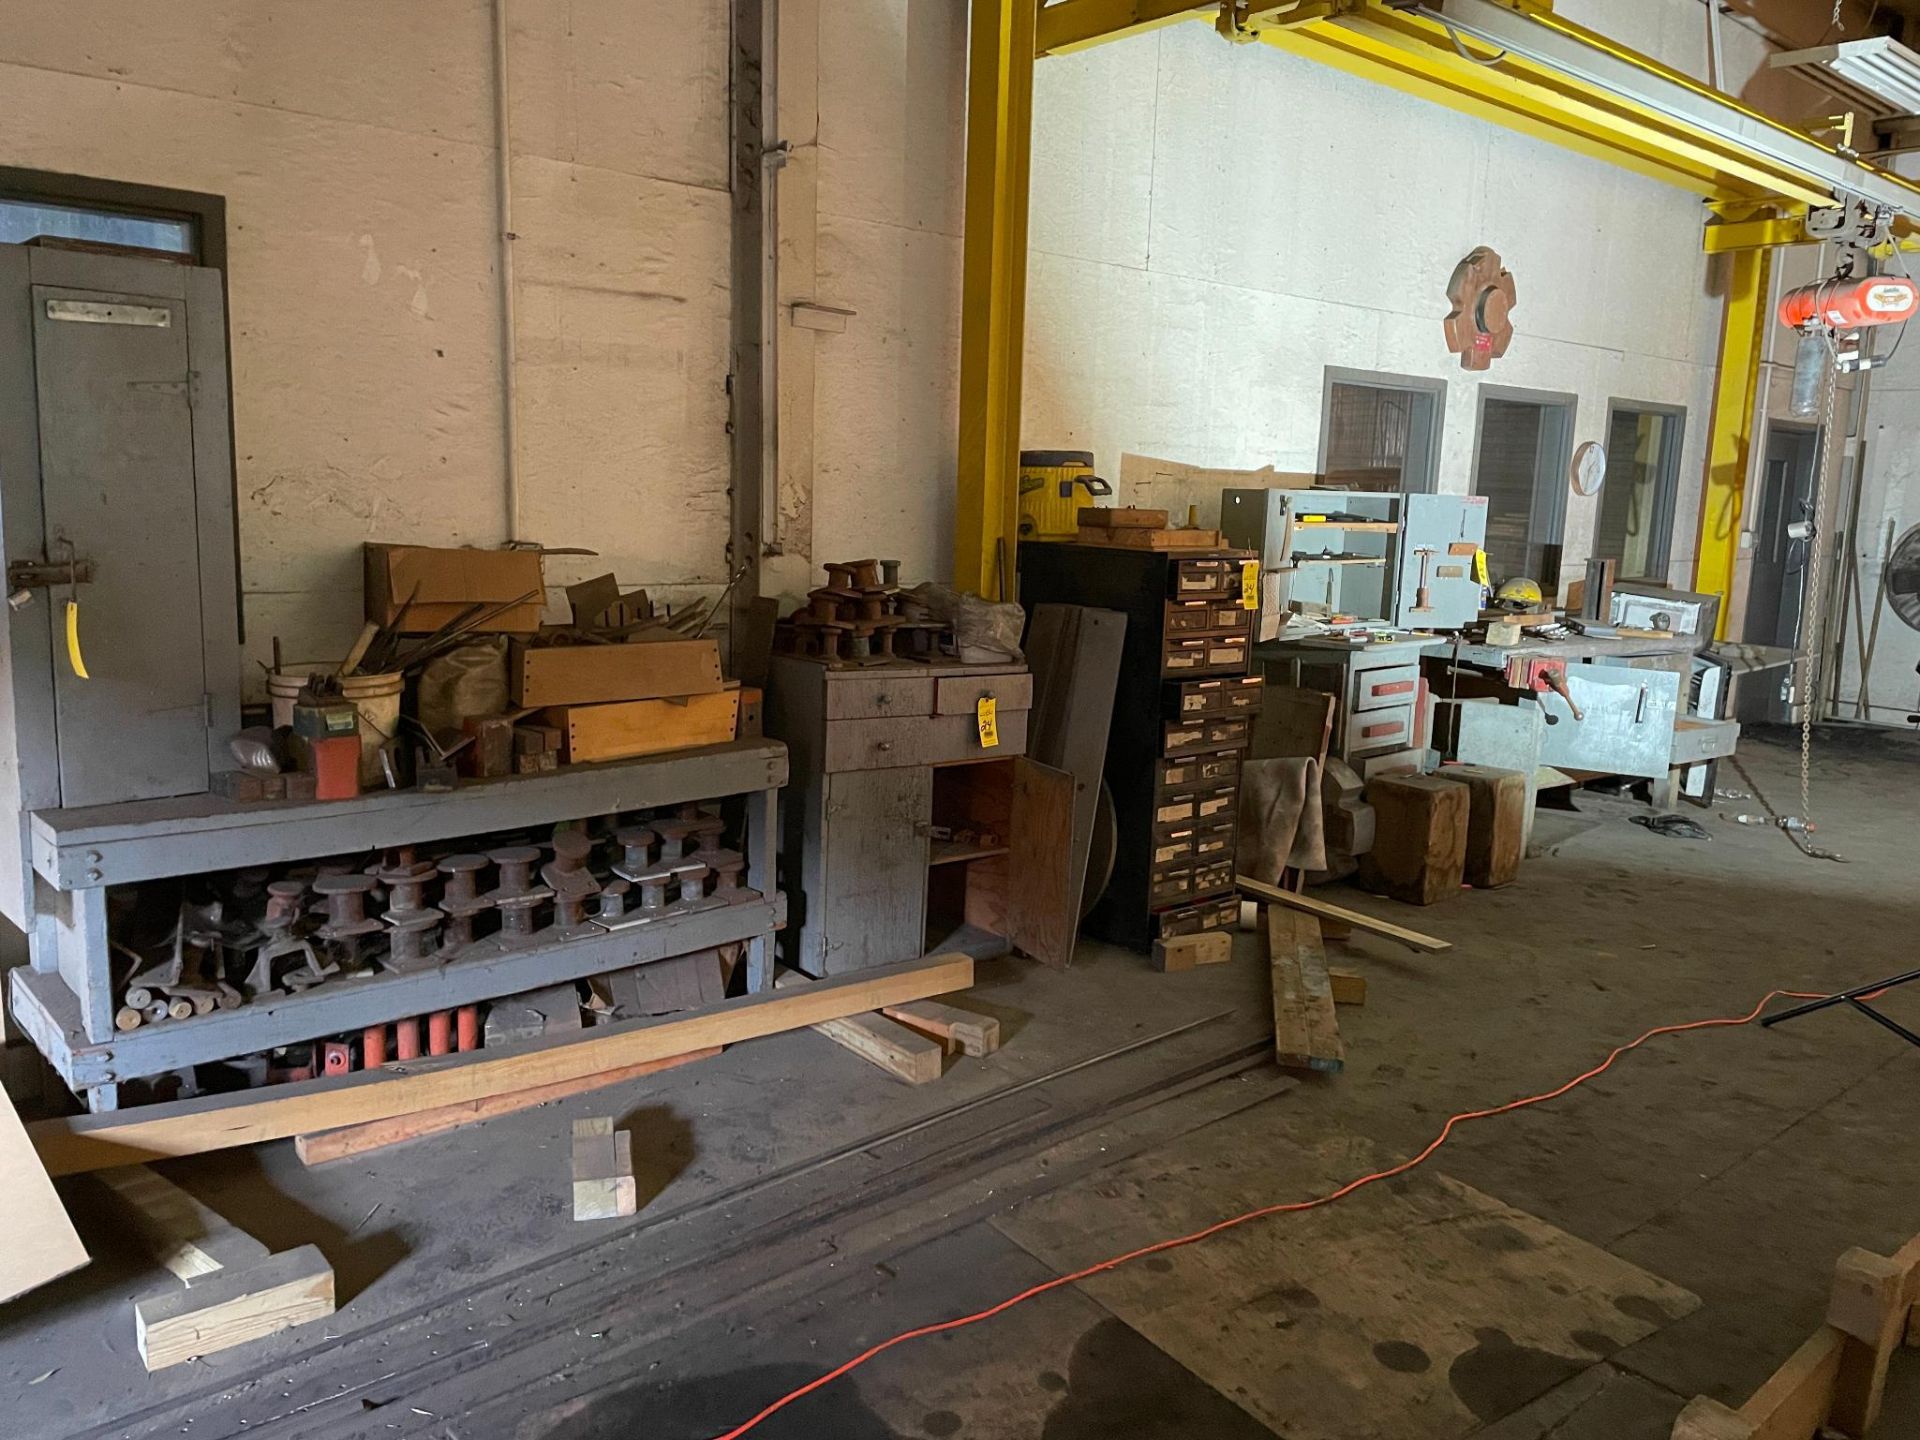 LOT OF WORK BENCHES & CABINETS, w/ contents: bar clamps, eye bolts, wood screws, lag screws, - Image 10 of 11